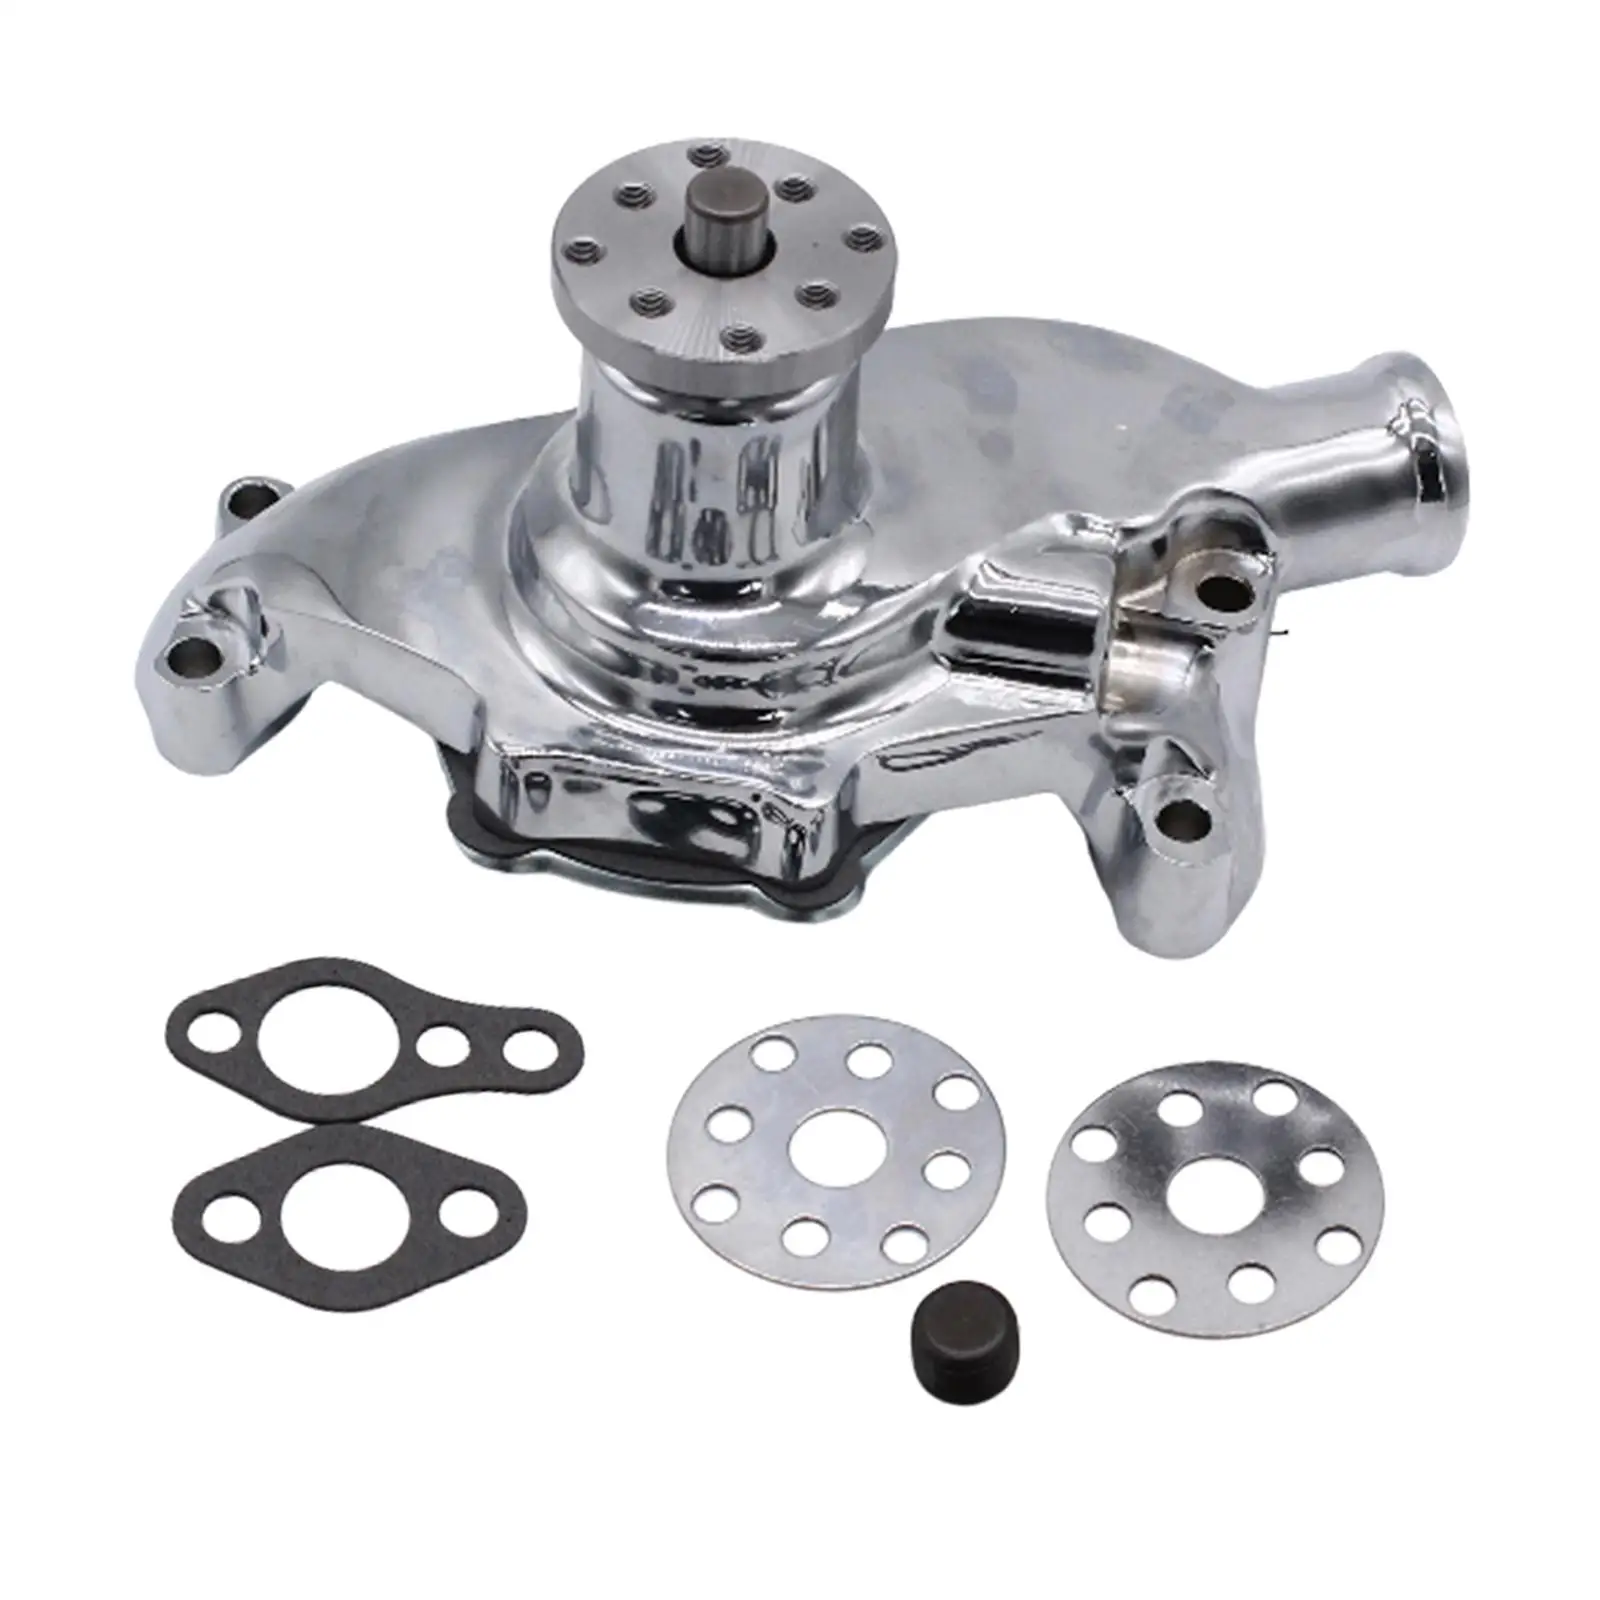 Short Water Pump Professional High Performance Directly Replace High Volume for Chevy SB Sbc 283 327 350 383 V8 Accessory